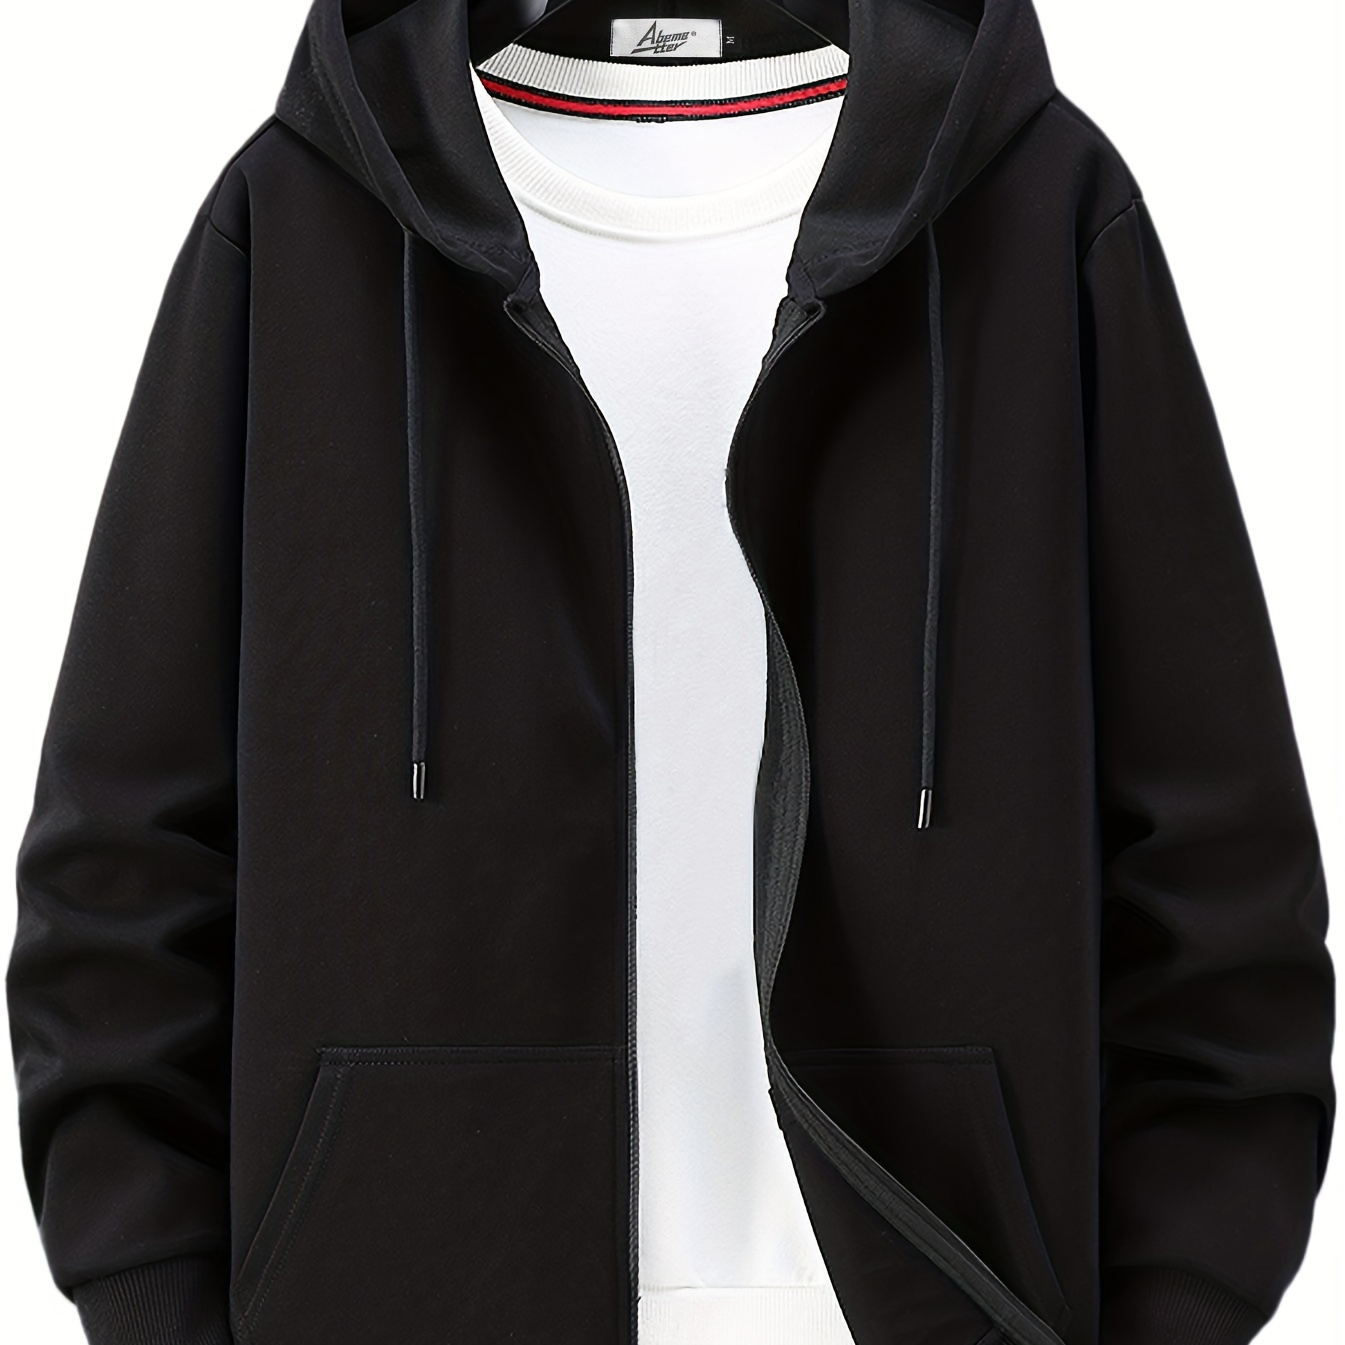 

Men's Spring And Autumn Thin Solid Composite Cotton Outdoor Casual Zipper Sweater Hooded Cardigan Coat